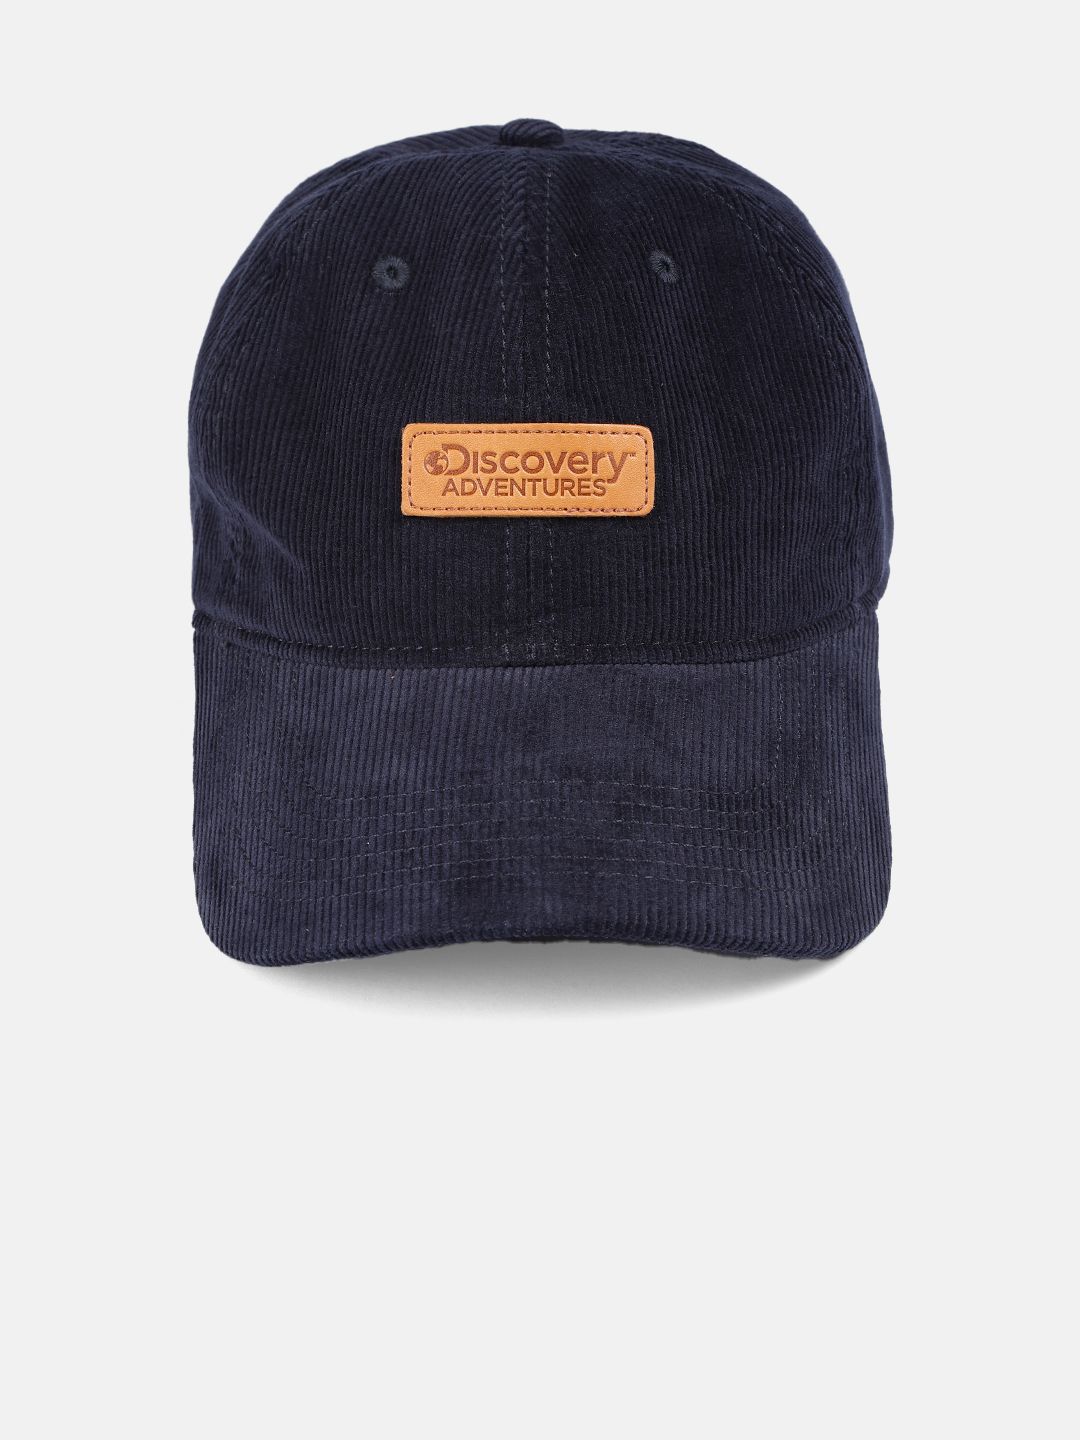 Roadster x Discovery Unisex Navy Blue Solid Baseball Cap Price in India